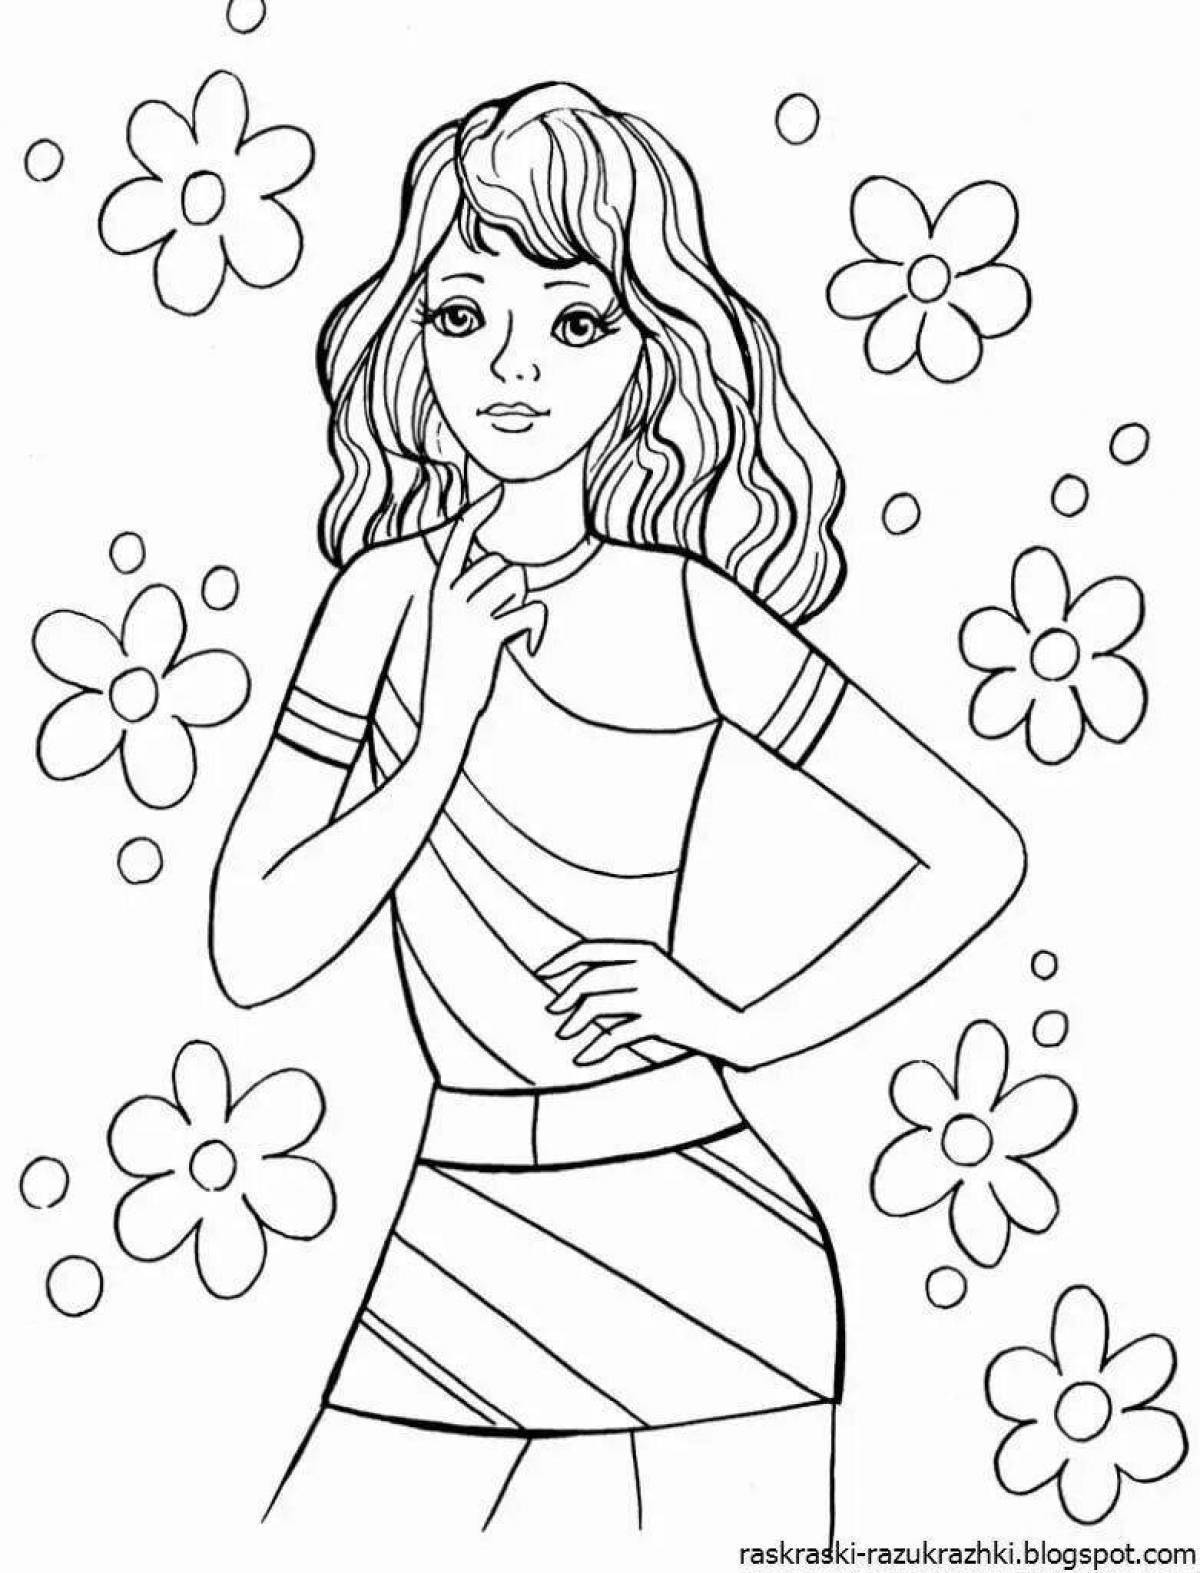 Fun coloring book for 18 year old girls